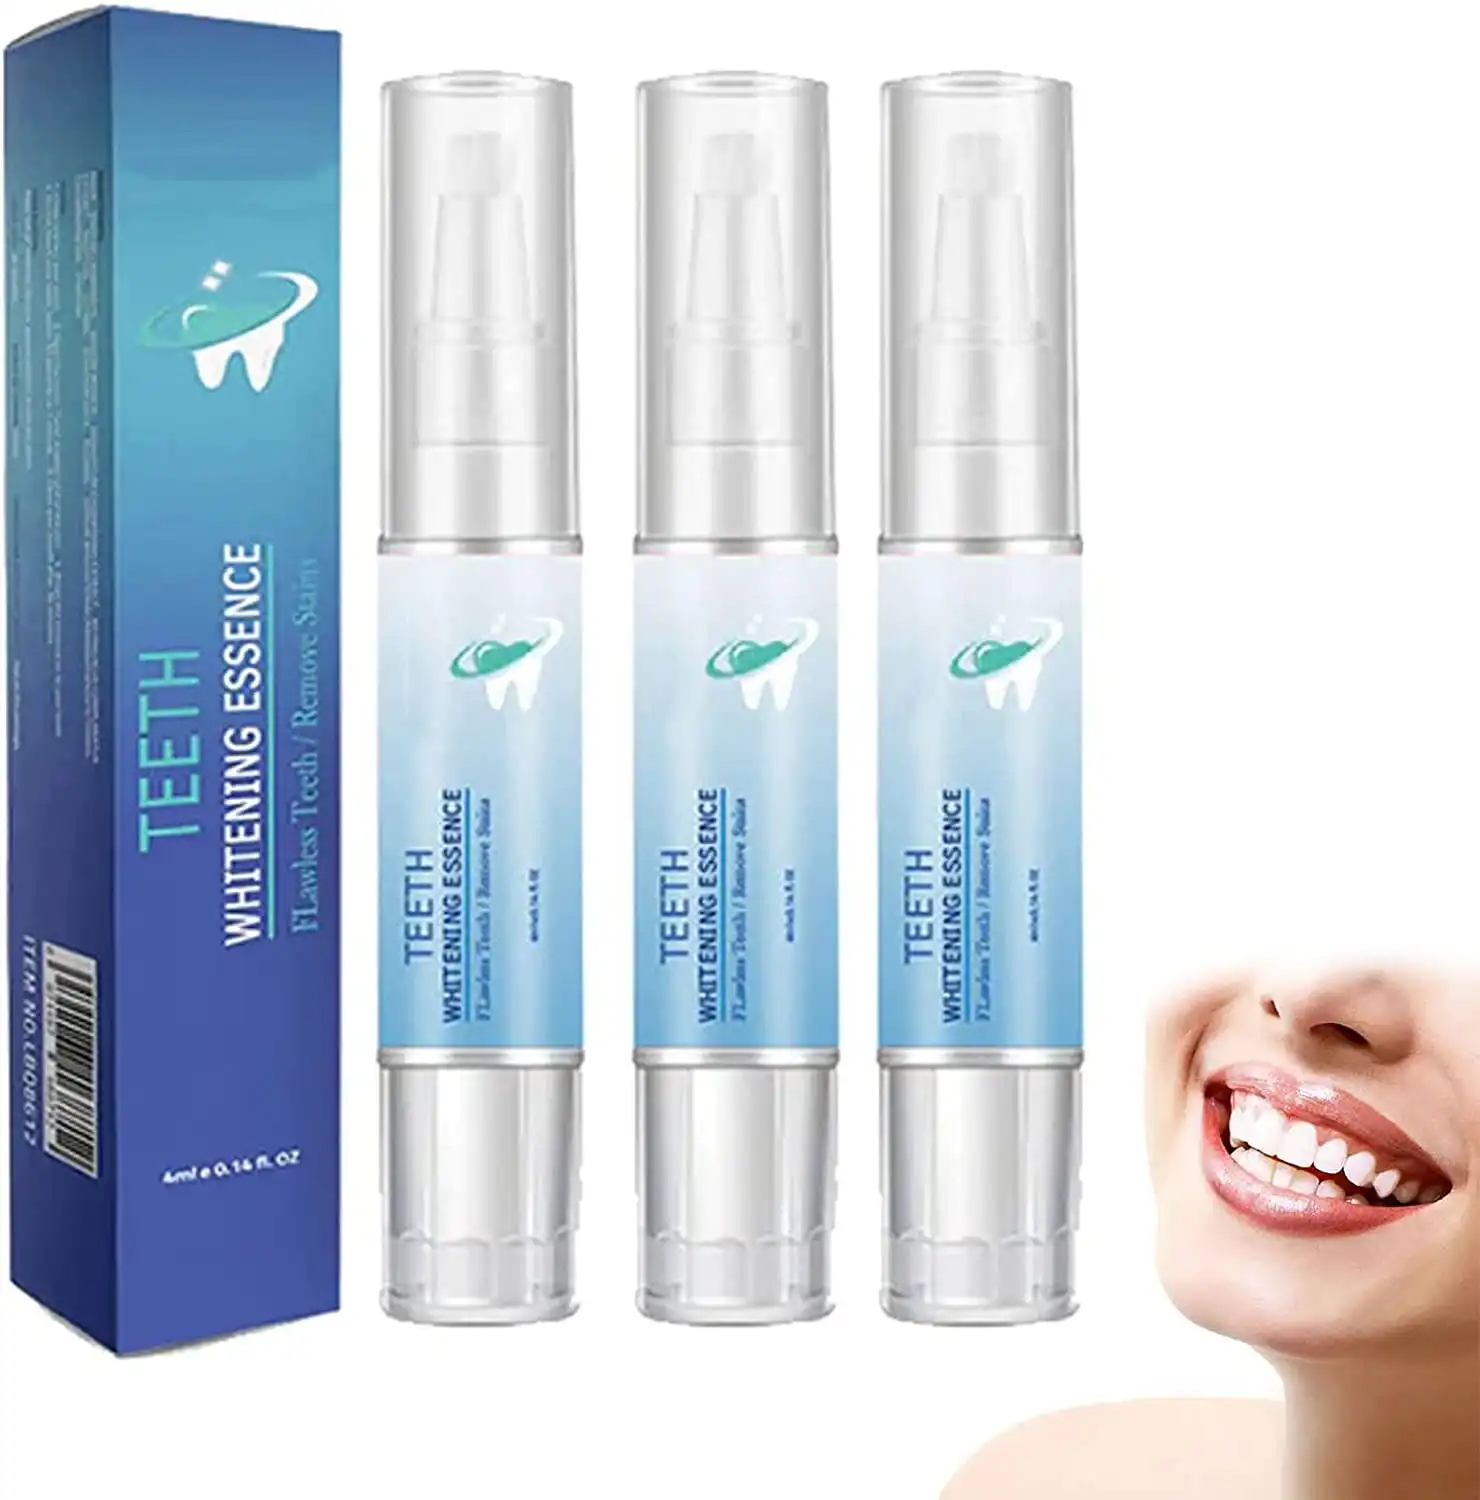 Herbaluxy Teeth Whitening Reviews: Does It Really Work?